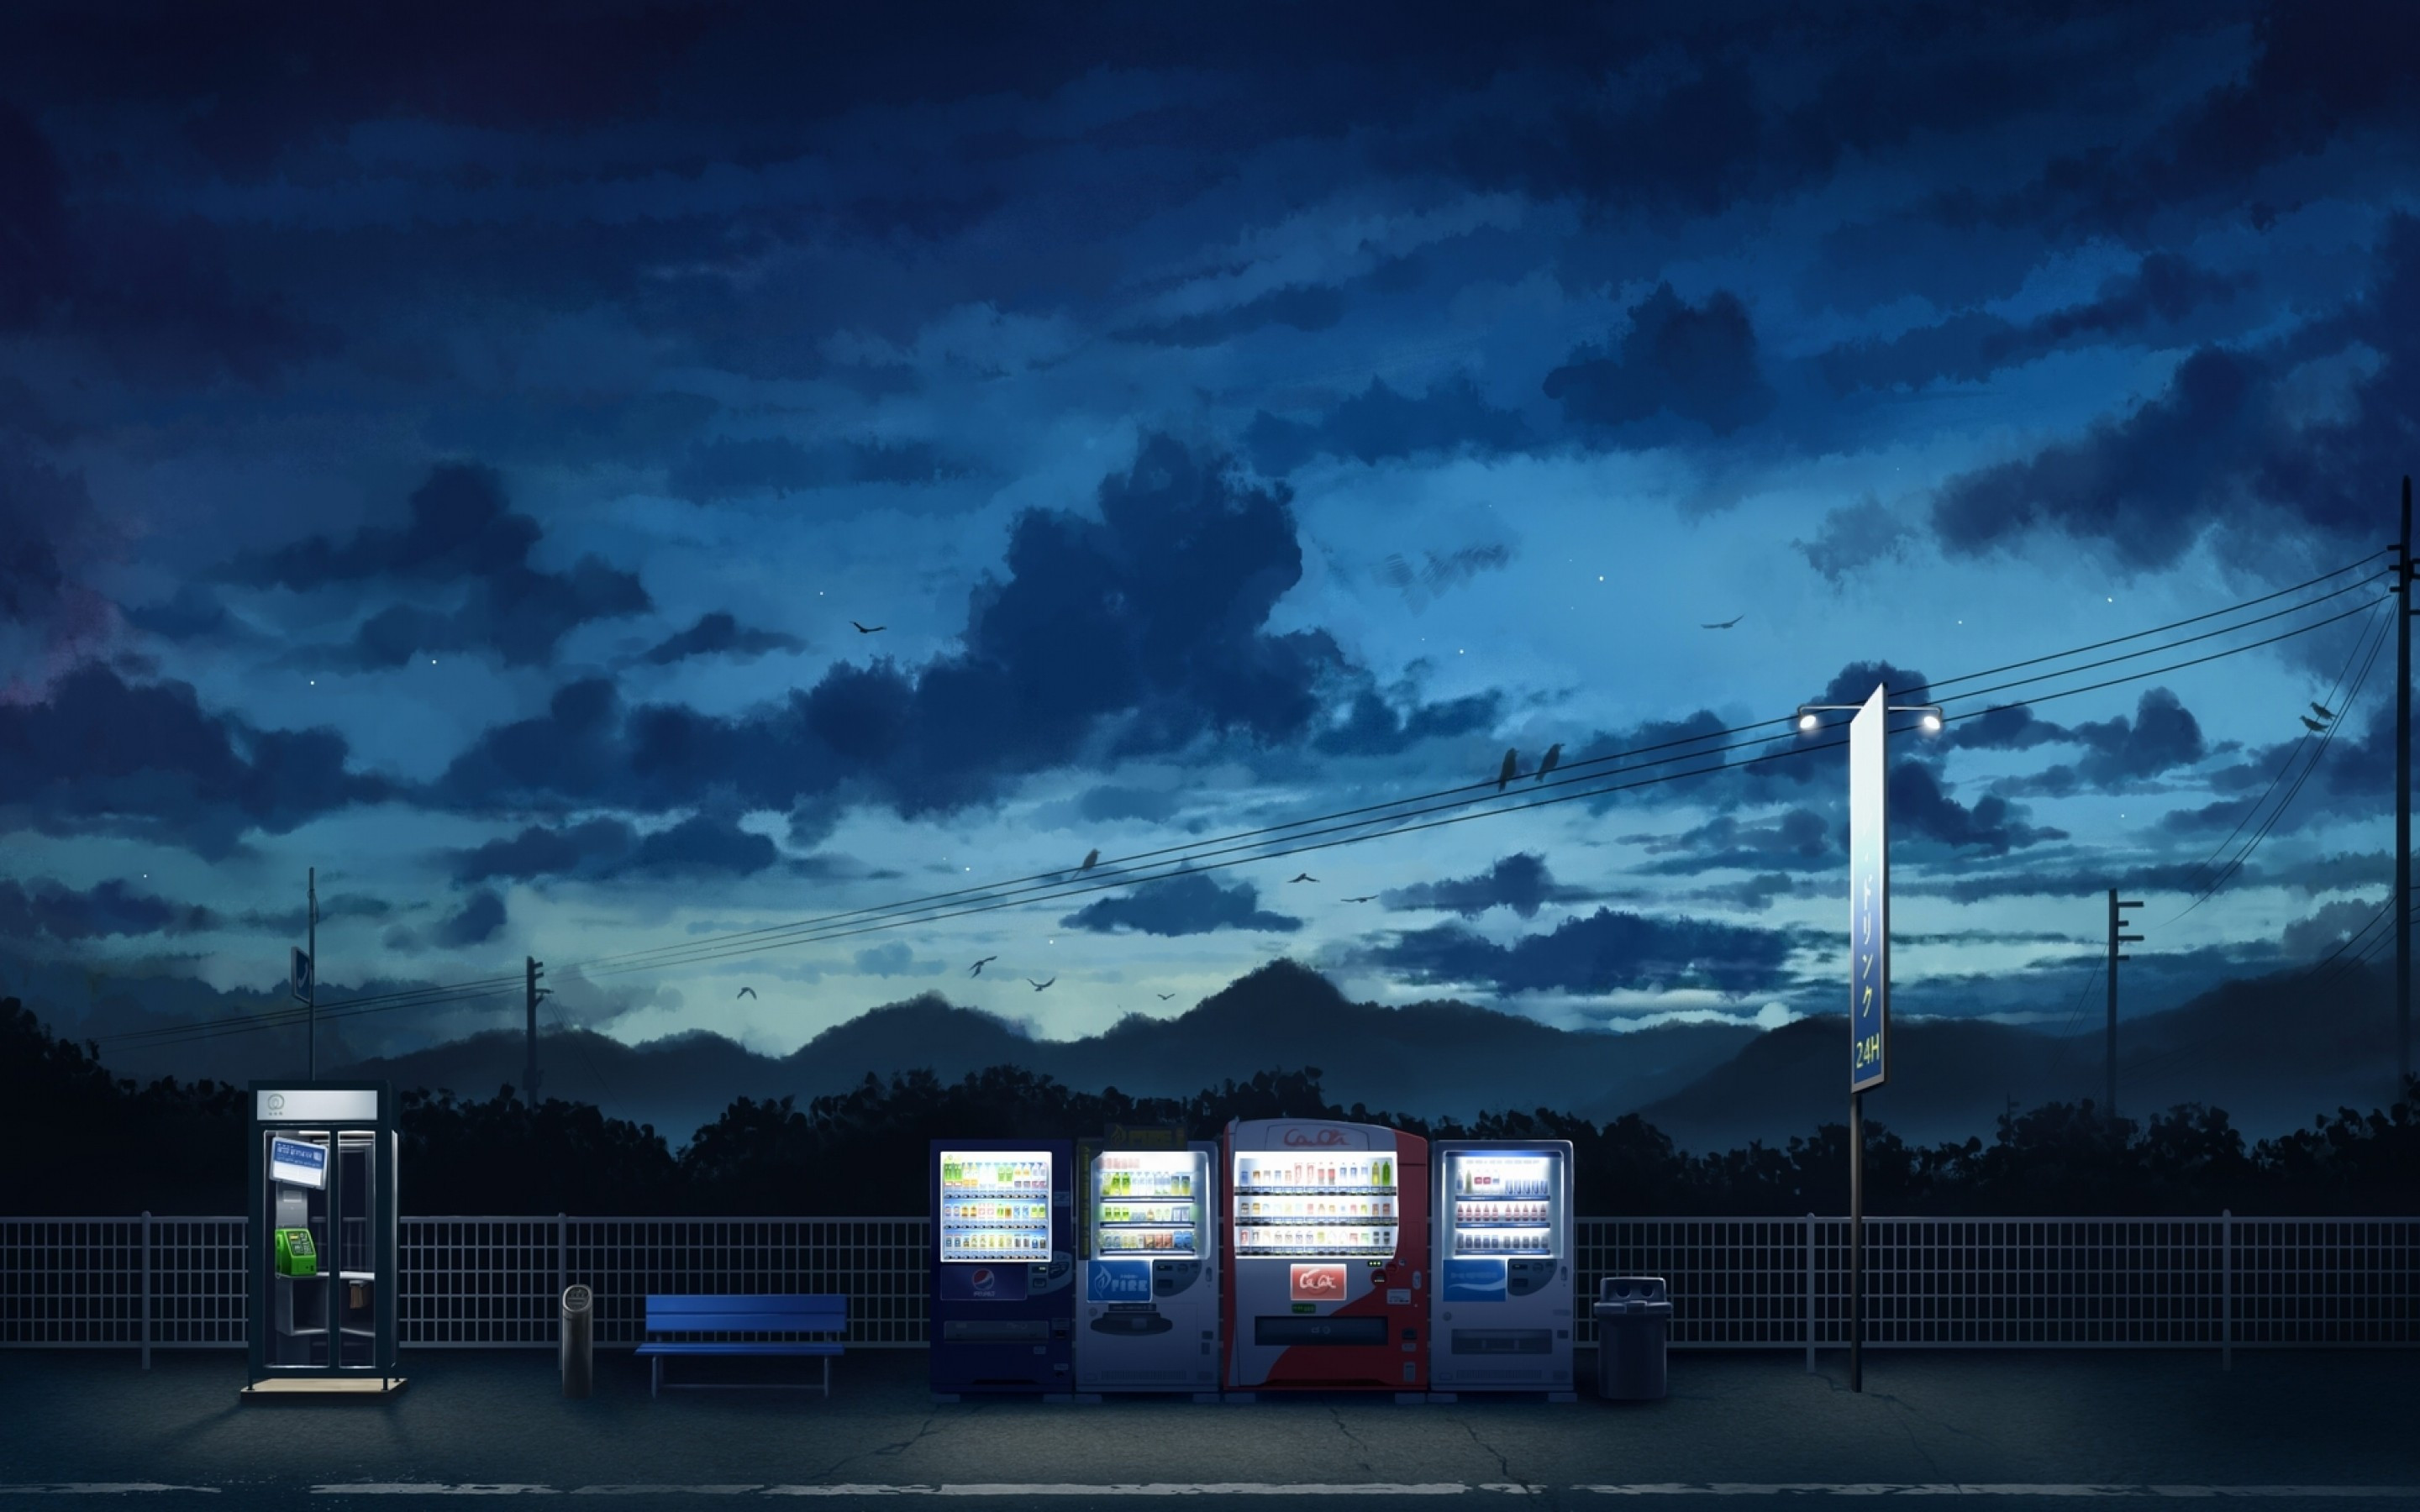 Download 2880x1800 Anime Night, Vending Machines, Scenic, Clouds Wallpaper for MacBook Pro 15 inch